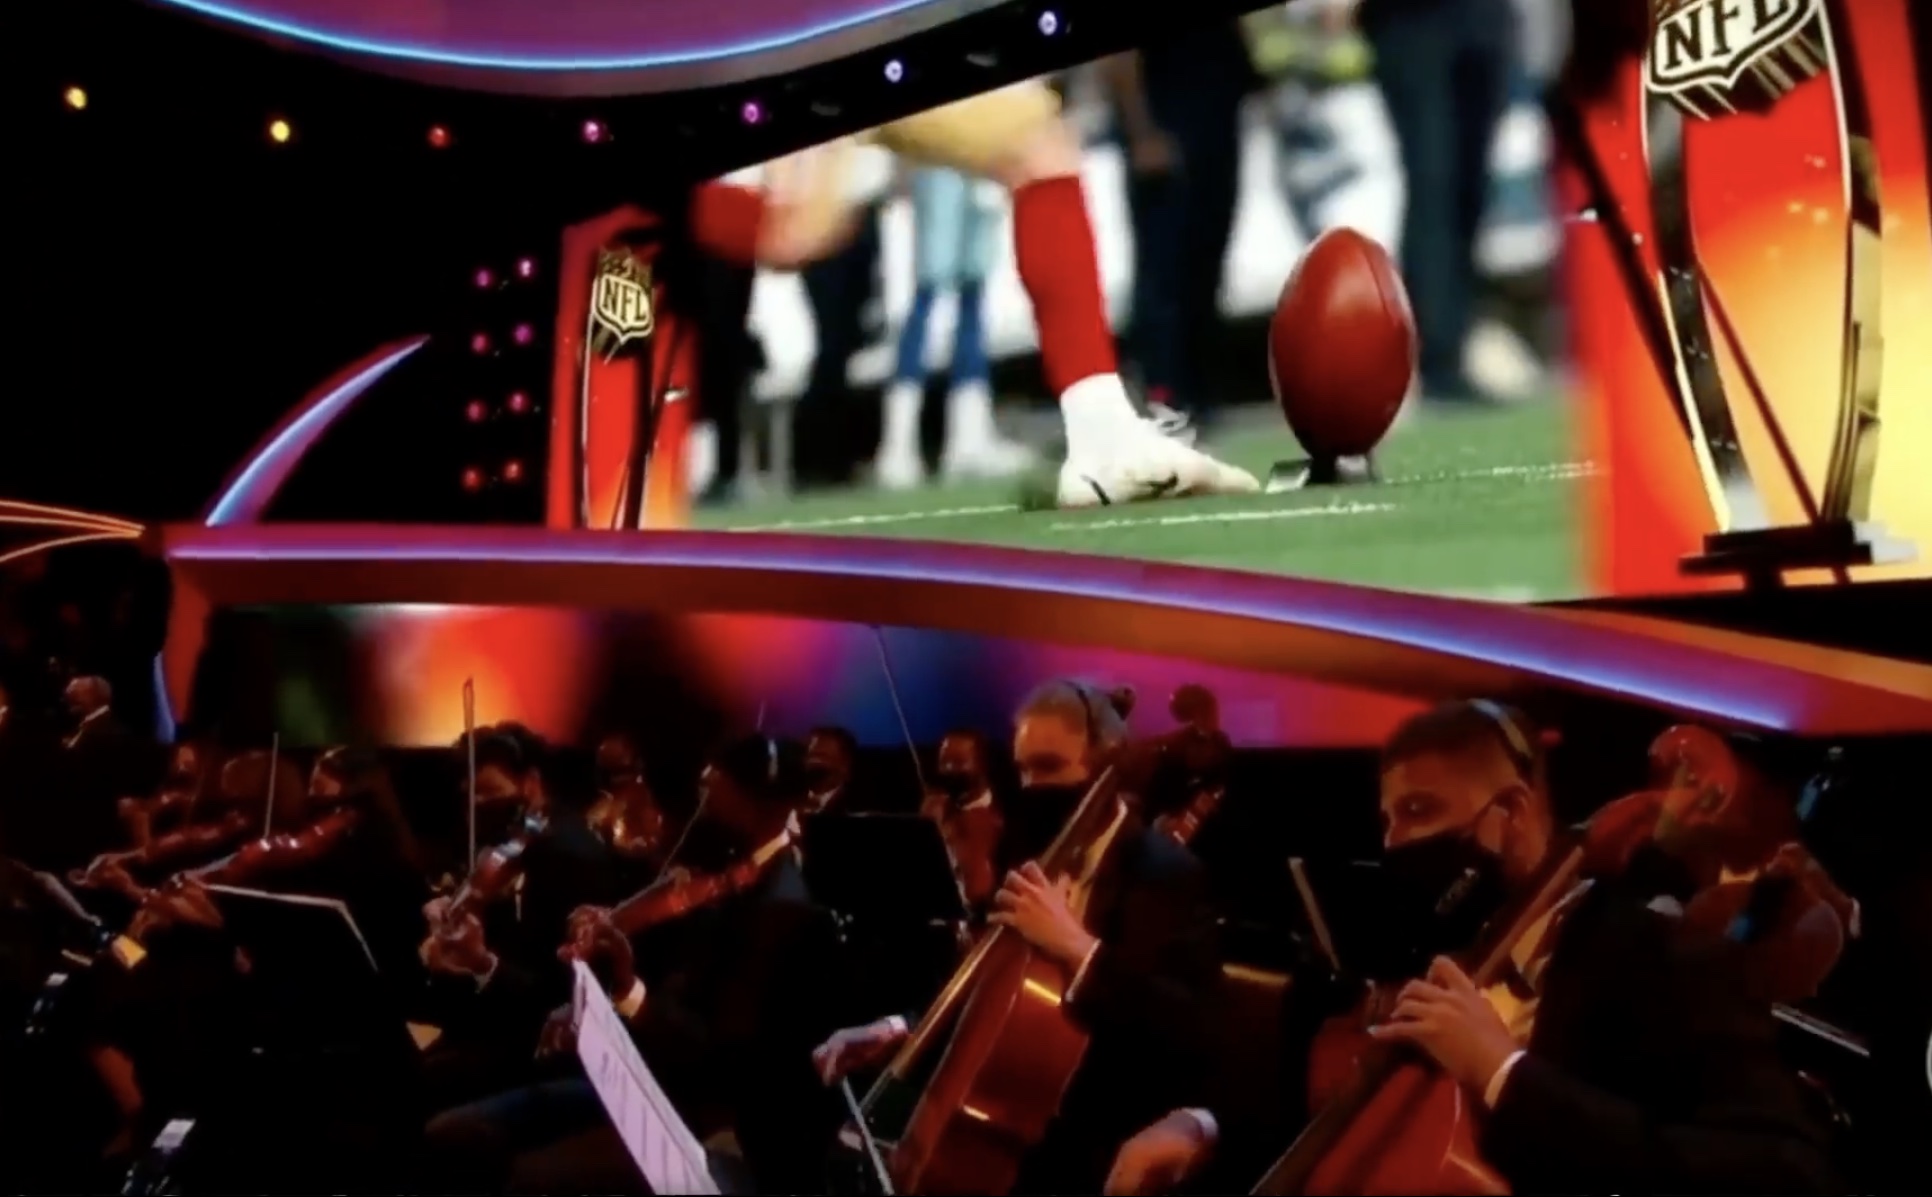 Two images together: string players on the bottom and a closeup of a football and a leg just before kickoff at a football game.